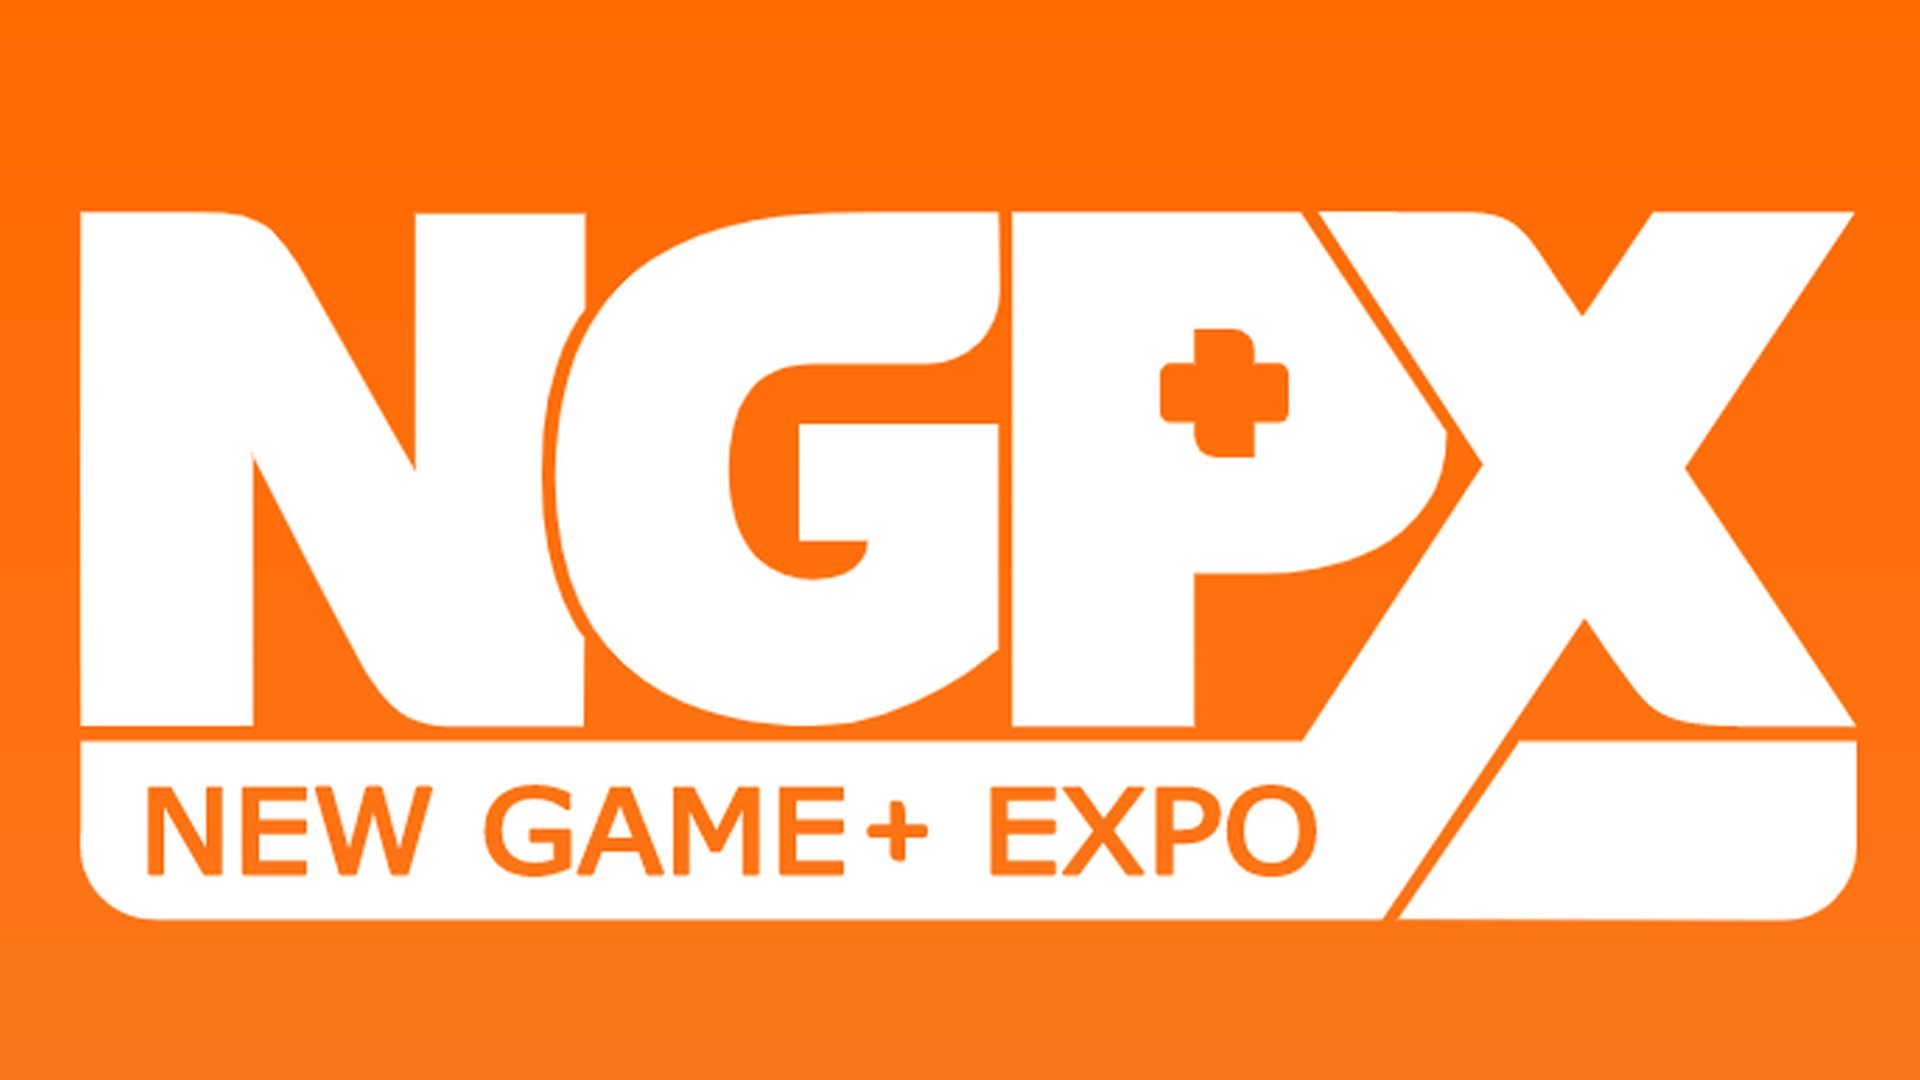 New Game + Expo 2020